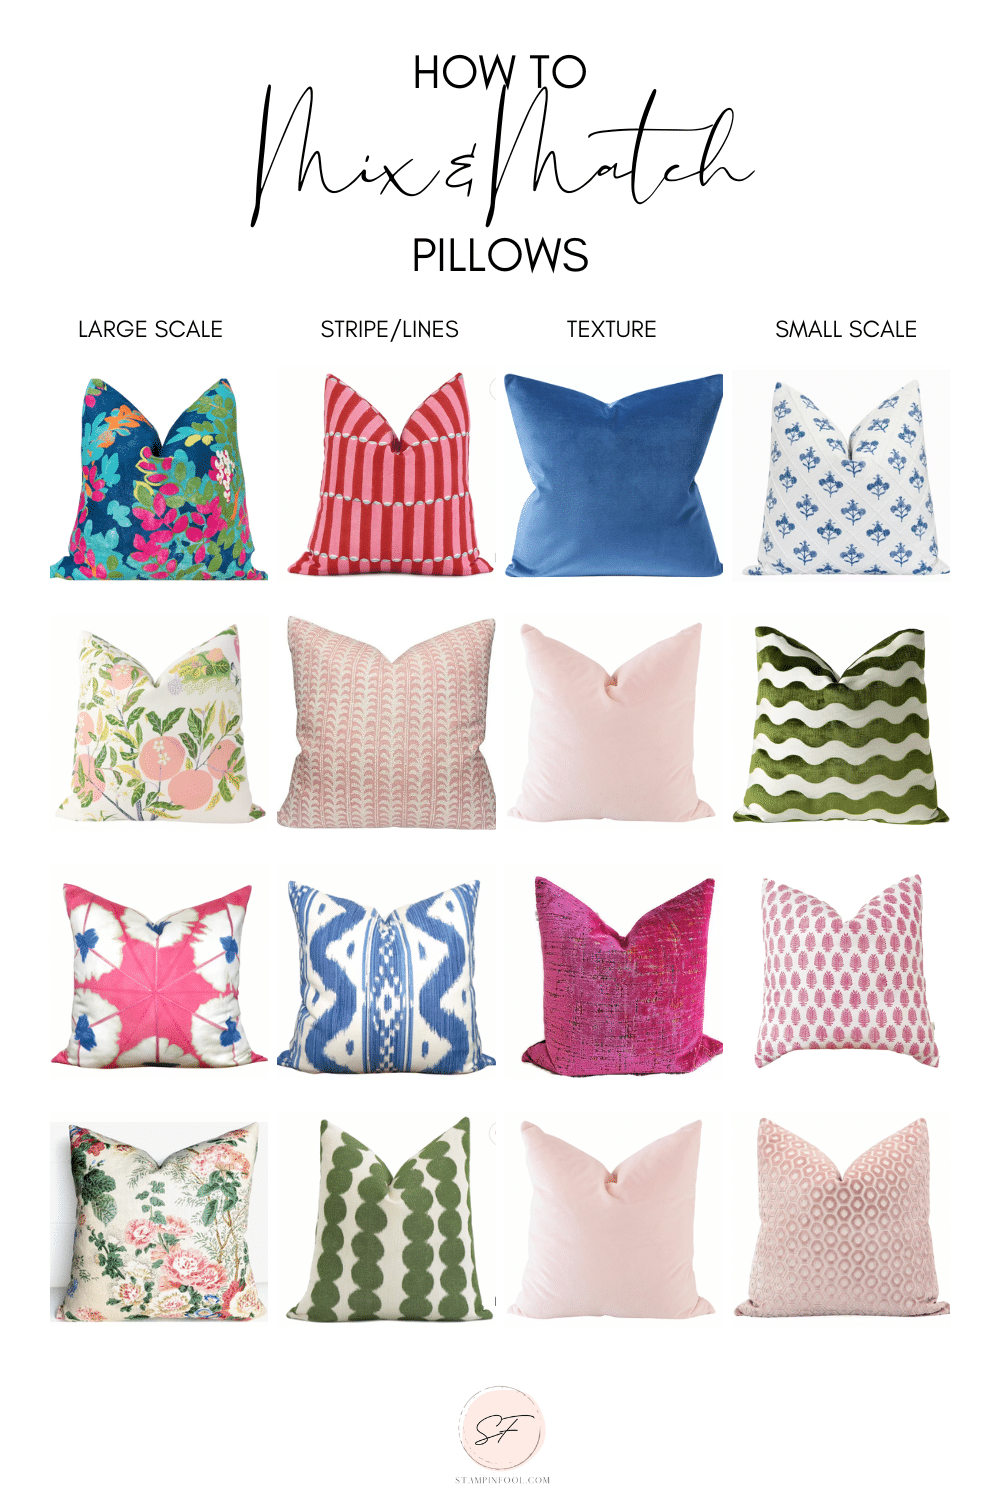 How to Mix and Match Pillows for your living room sofa